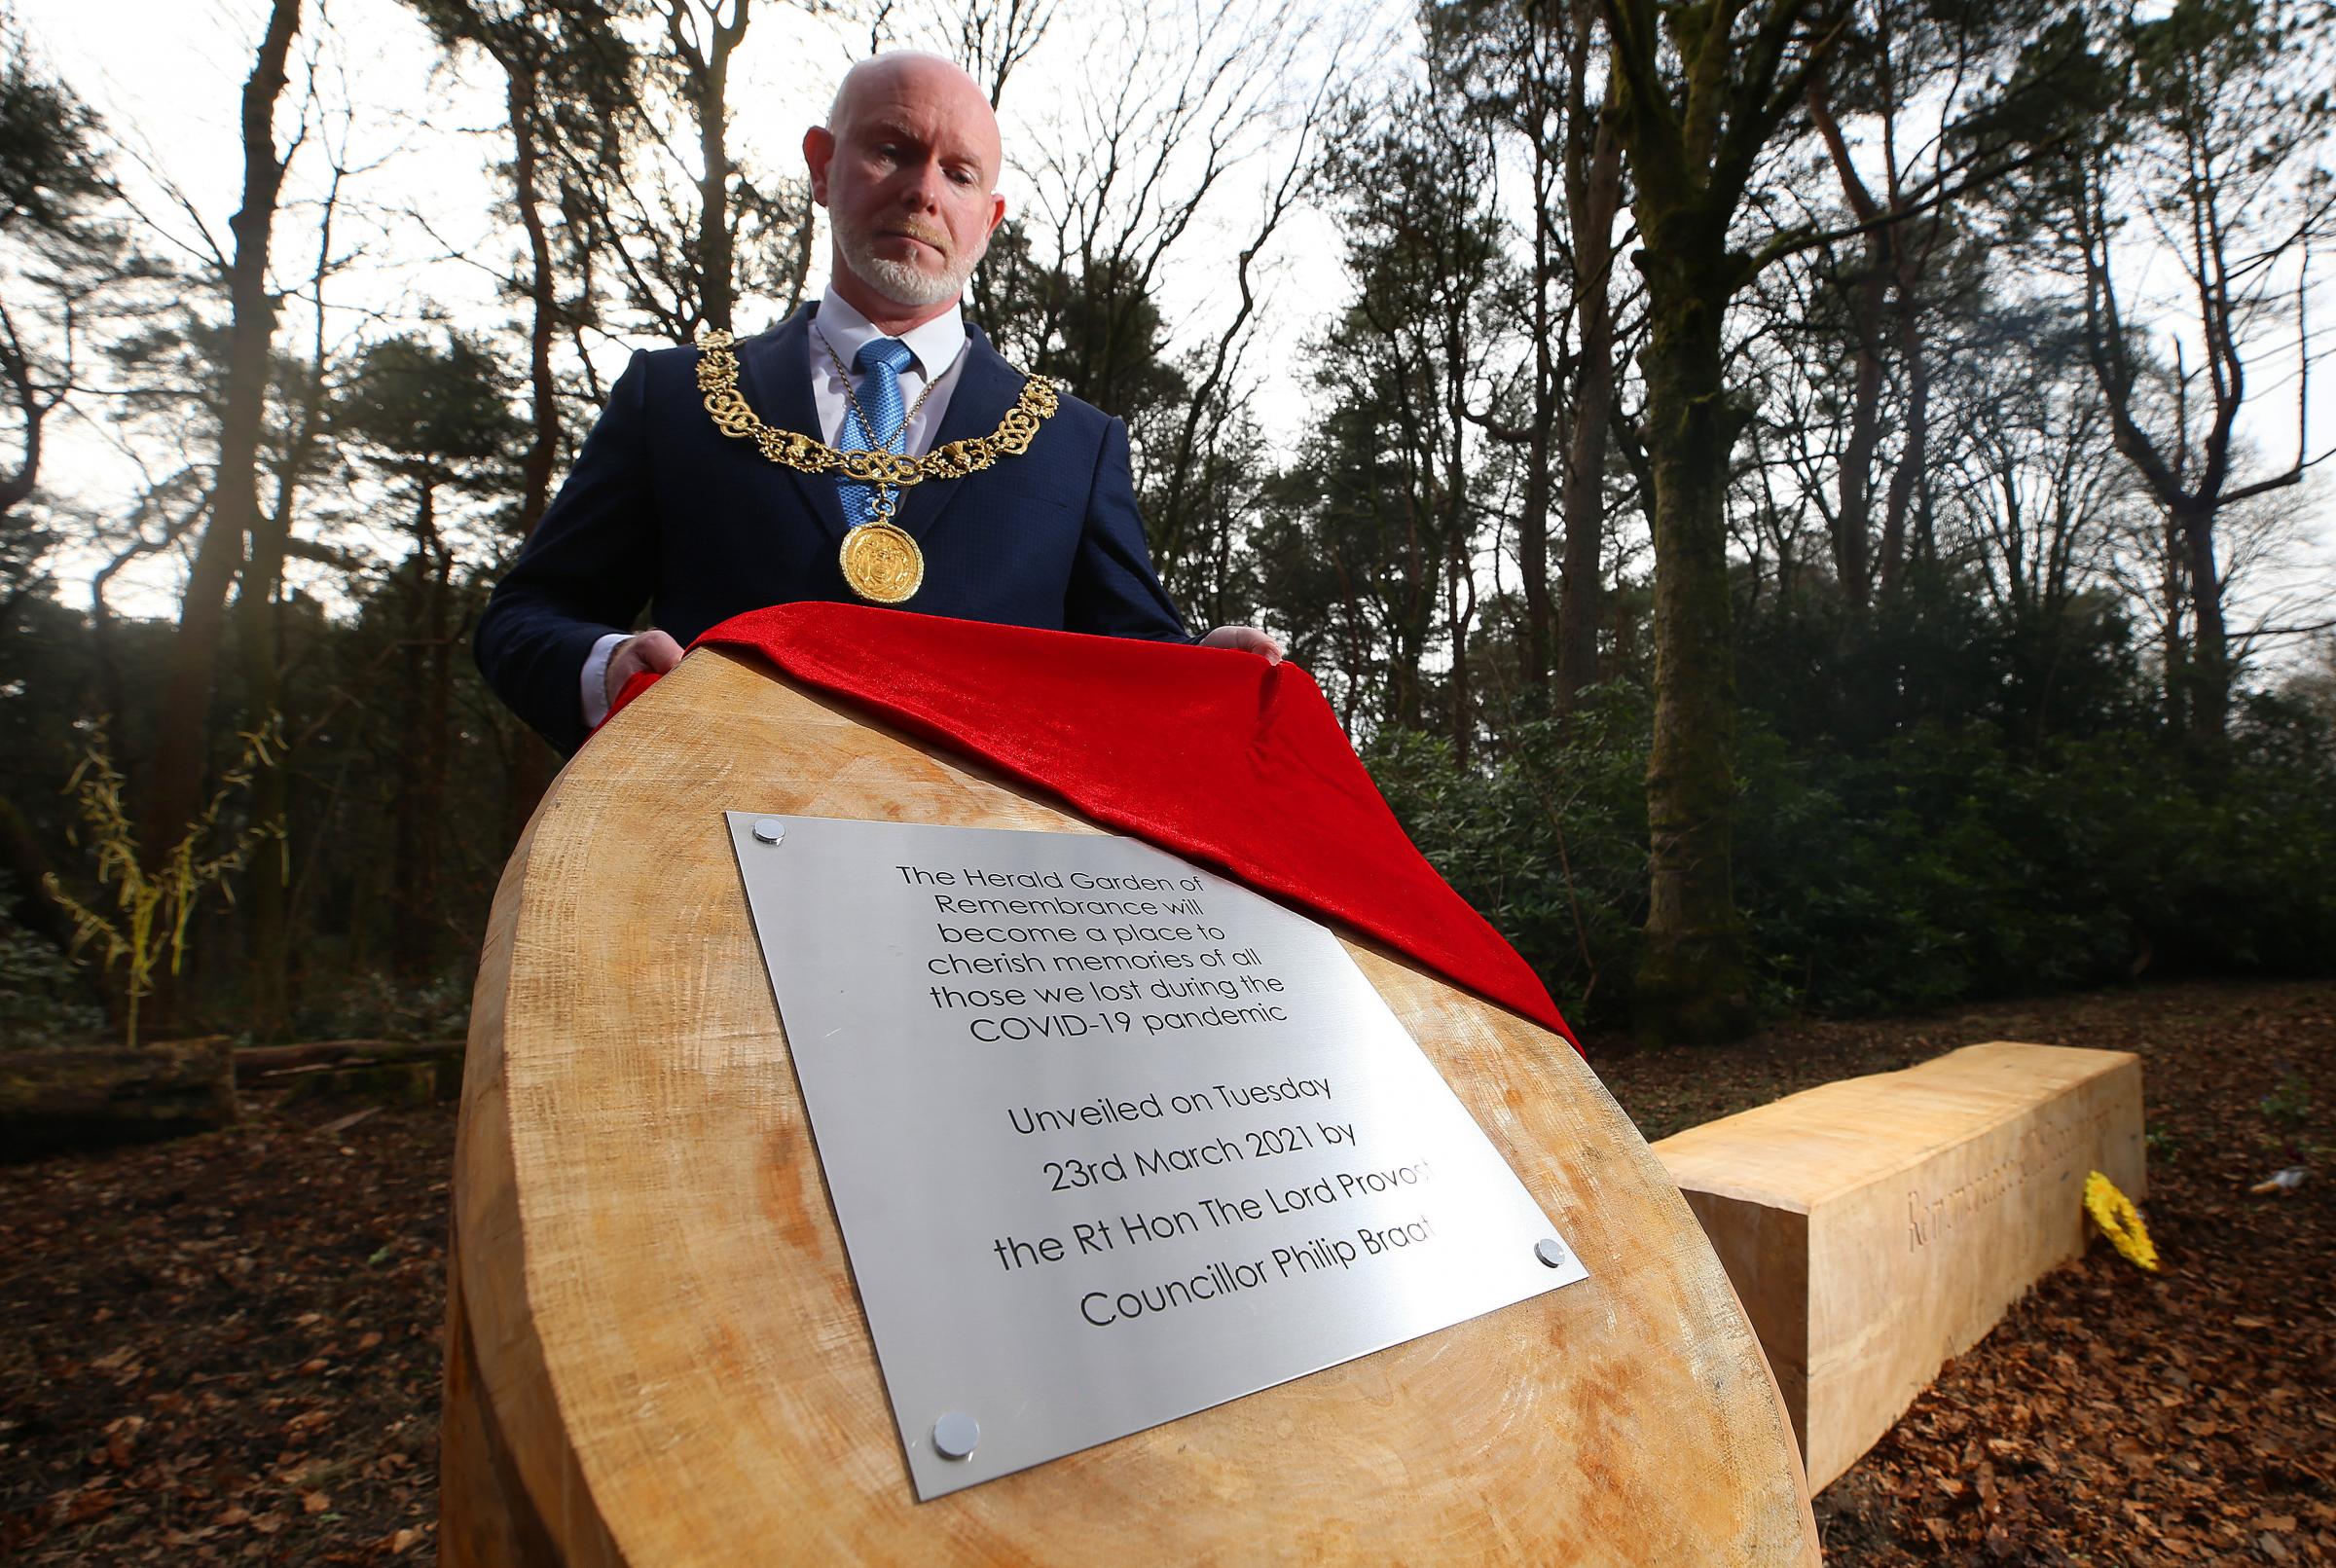 The plaque is unveiled by Lord Provost of Glasgow Philip Braat in Pollok Country Park to mark the site reveal